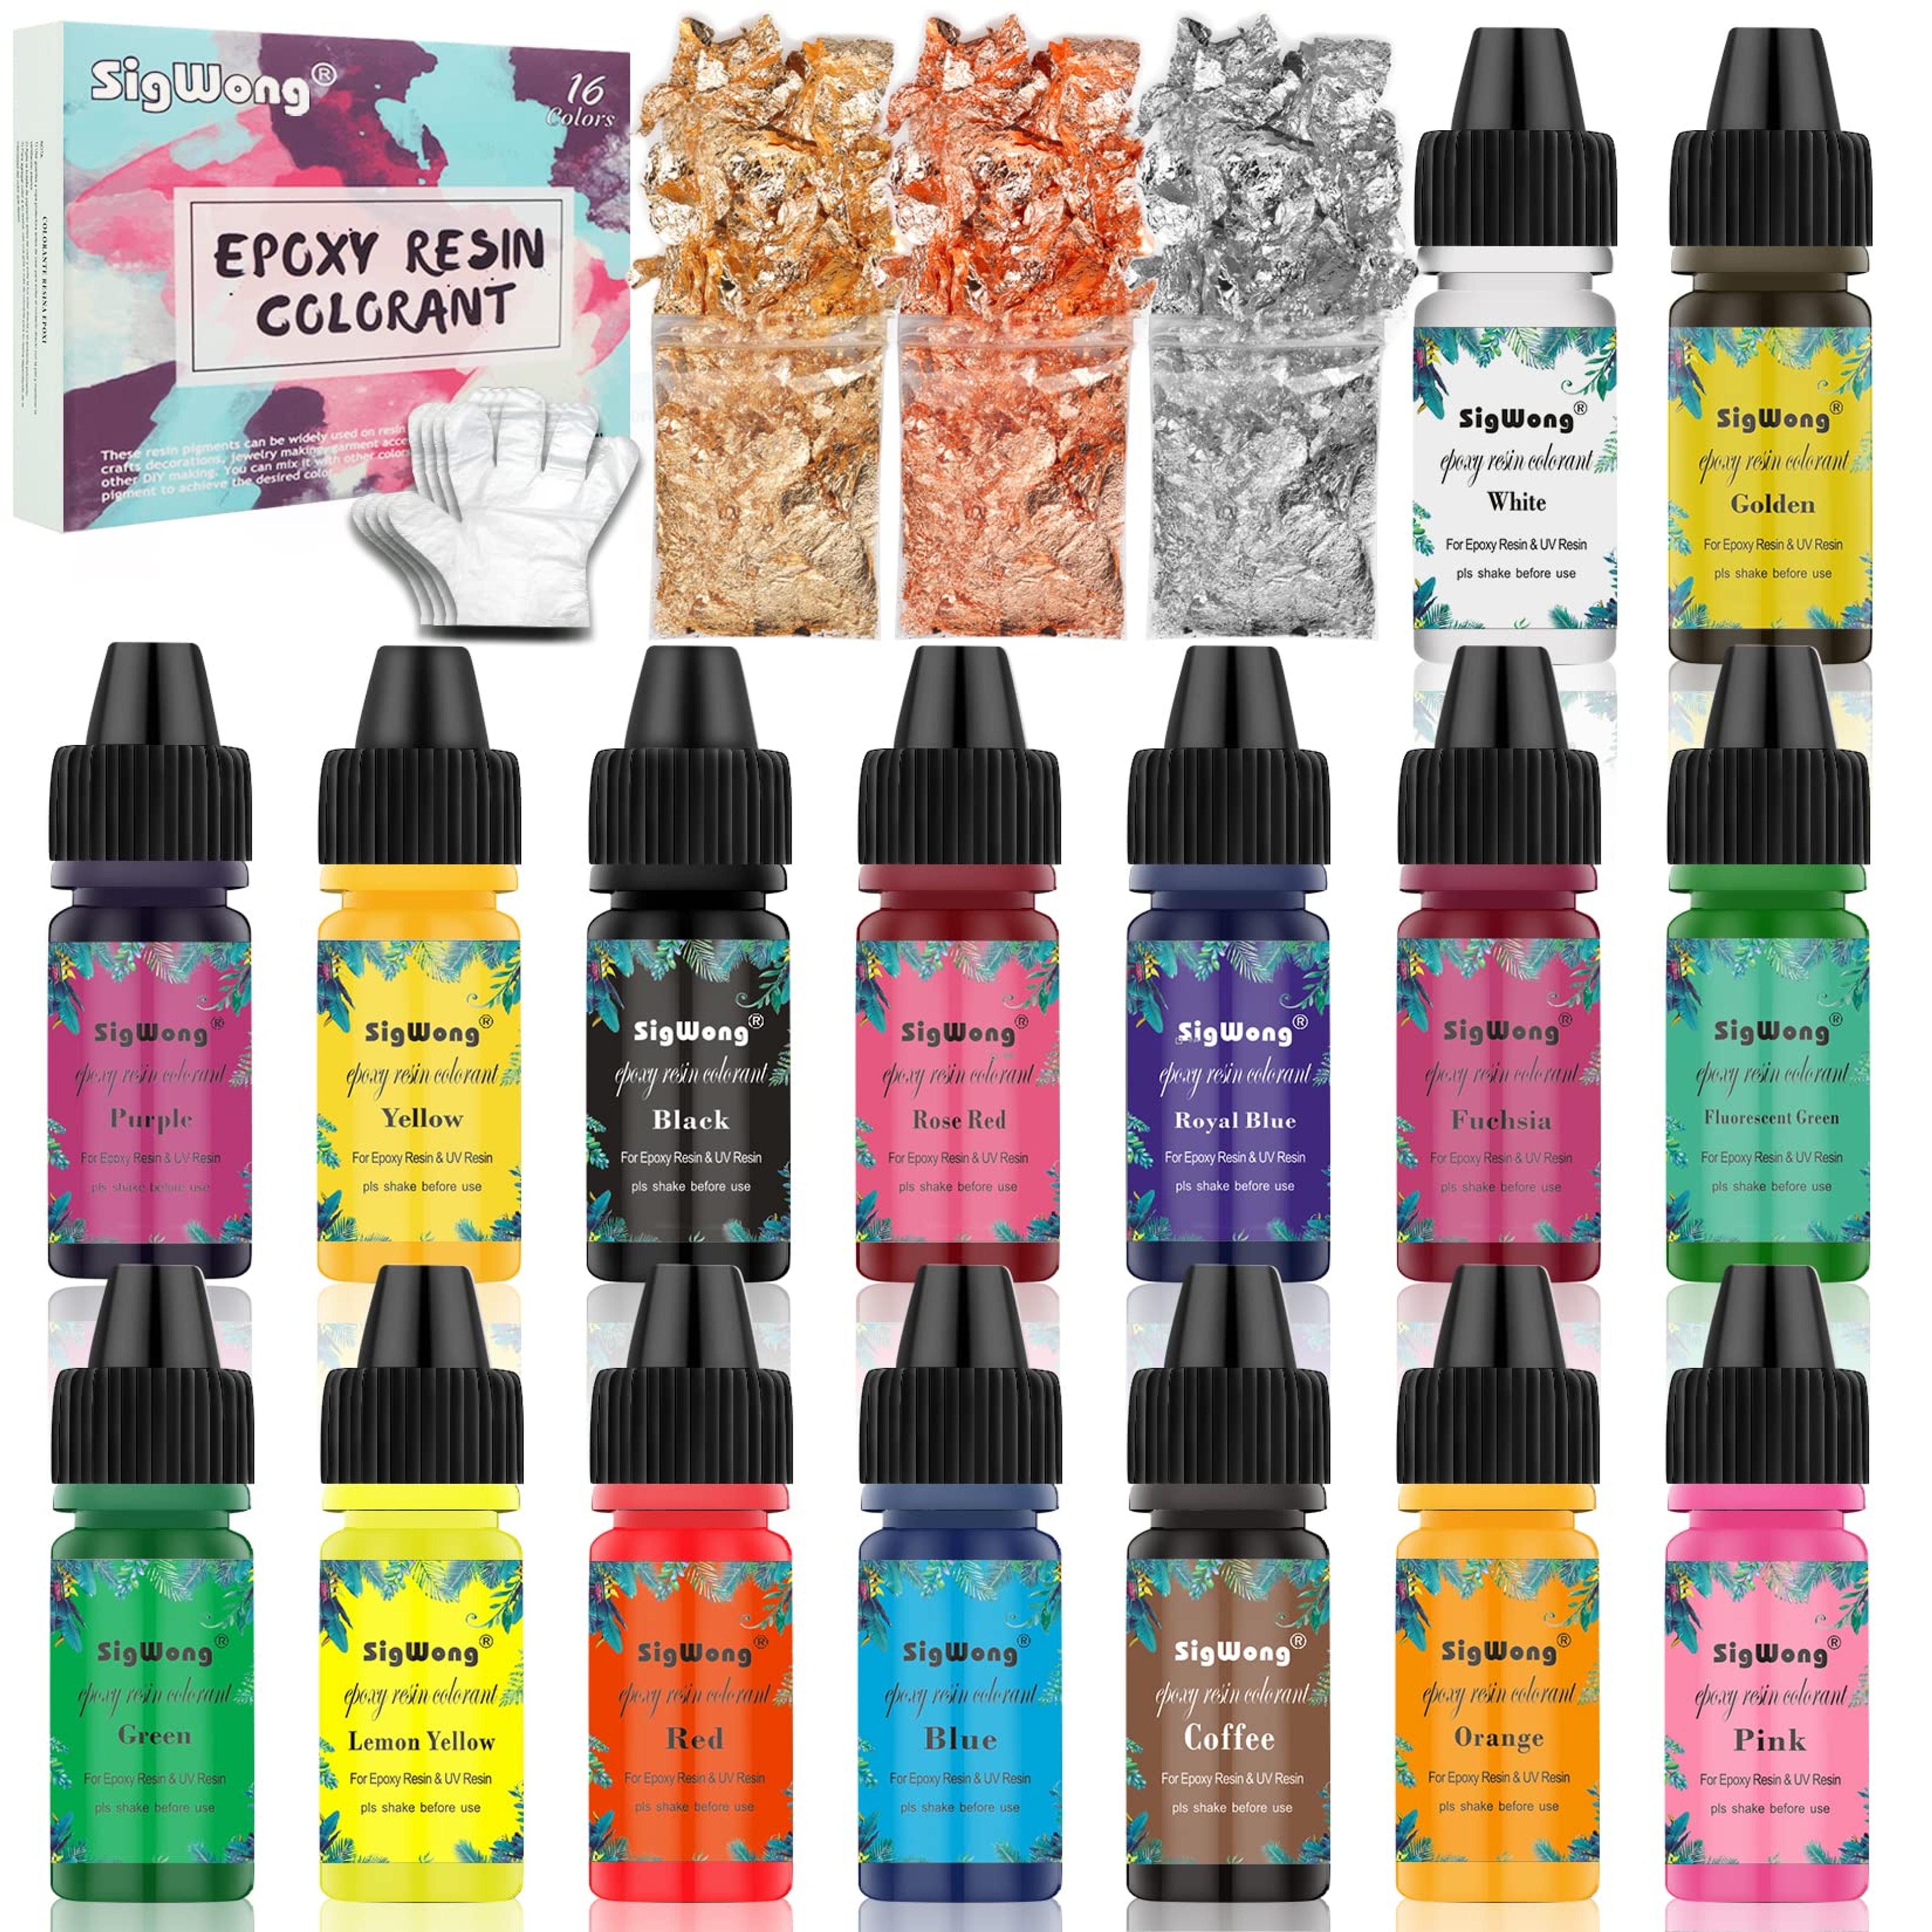 Amazon.com : Epoxy Resin Pigment - 16 Color Liquid Translucent Epoxy Resin Colorant, Highly Concentrated Epoxy Resin Dye for DIY Jewelry Making, AB Resin Coloring for Paint, Craft - 10ml Each : Arts, Crafts & Sewing